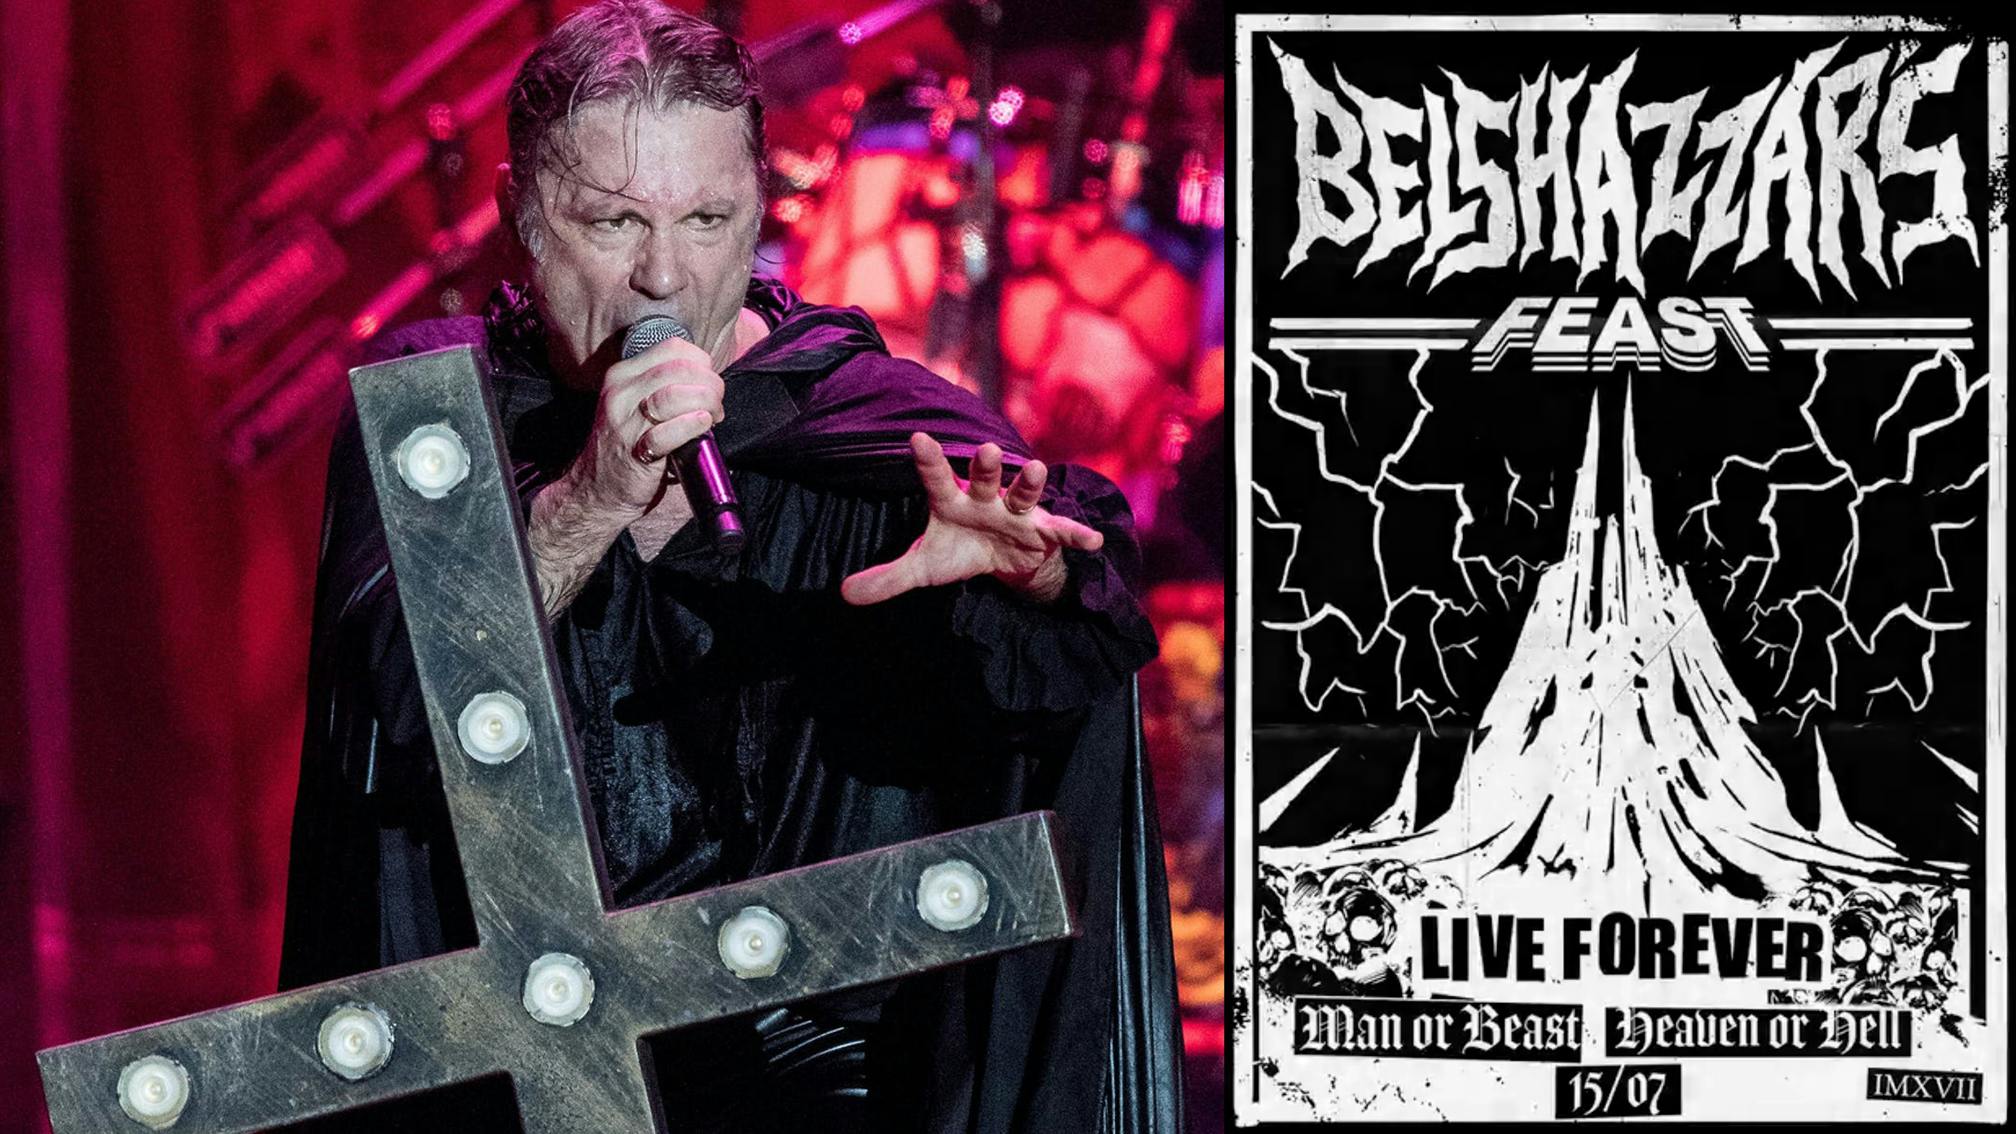 Iron Maiden: Bruce Dickinson invites fans to Belshazzar's Feast on July 15